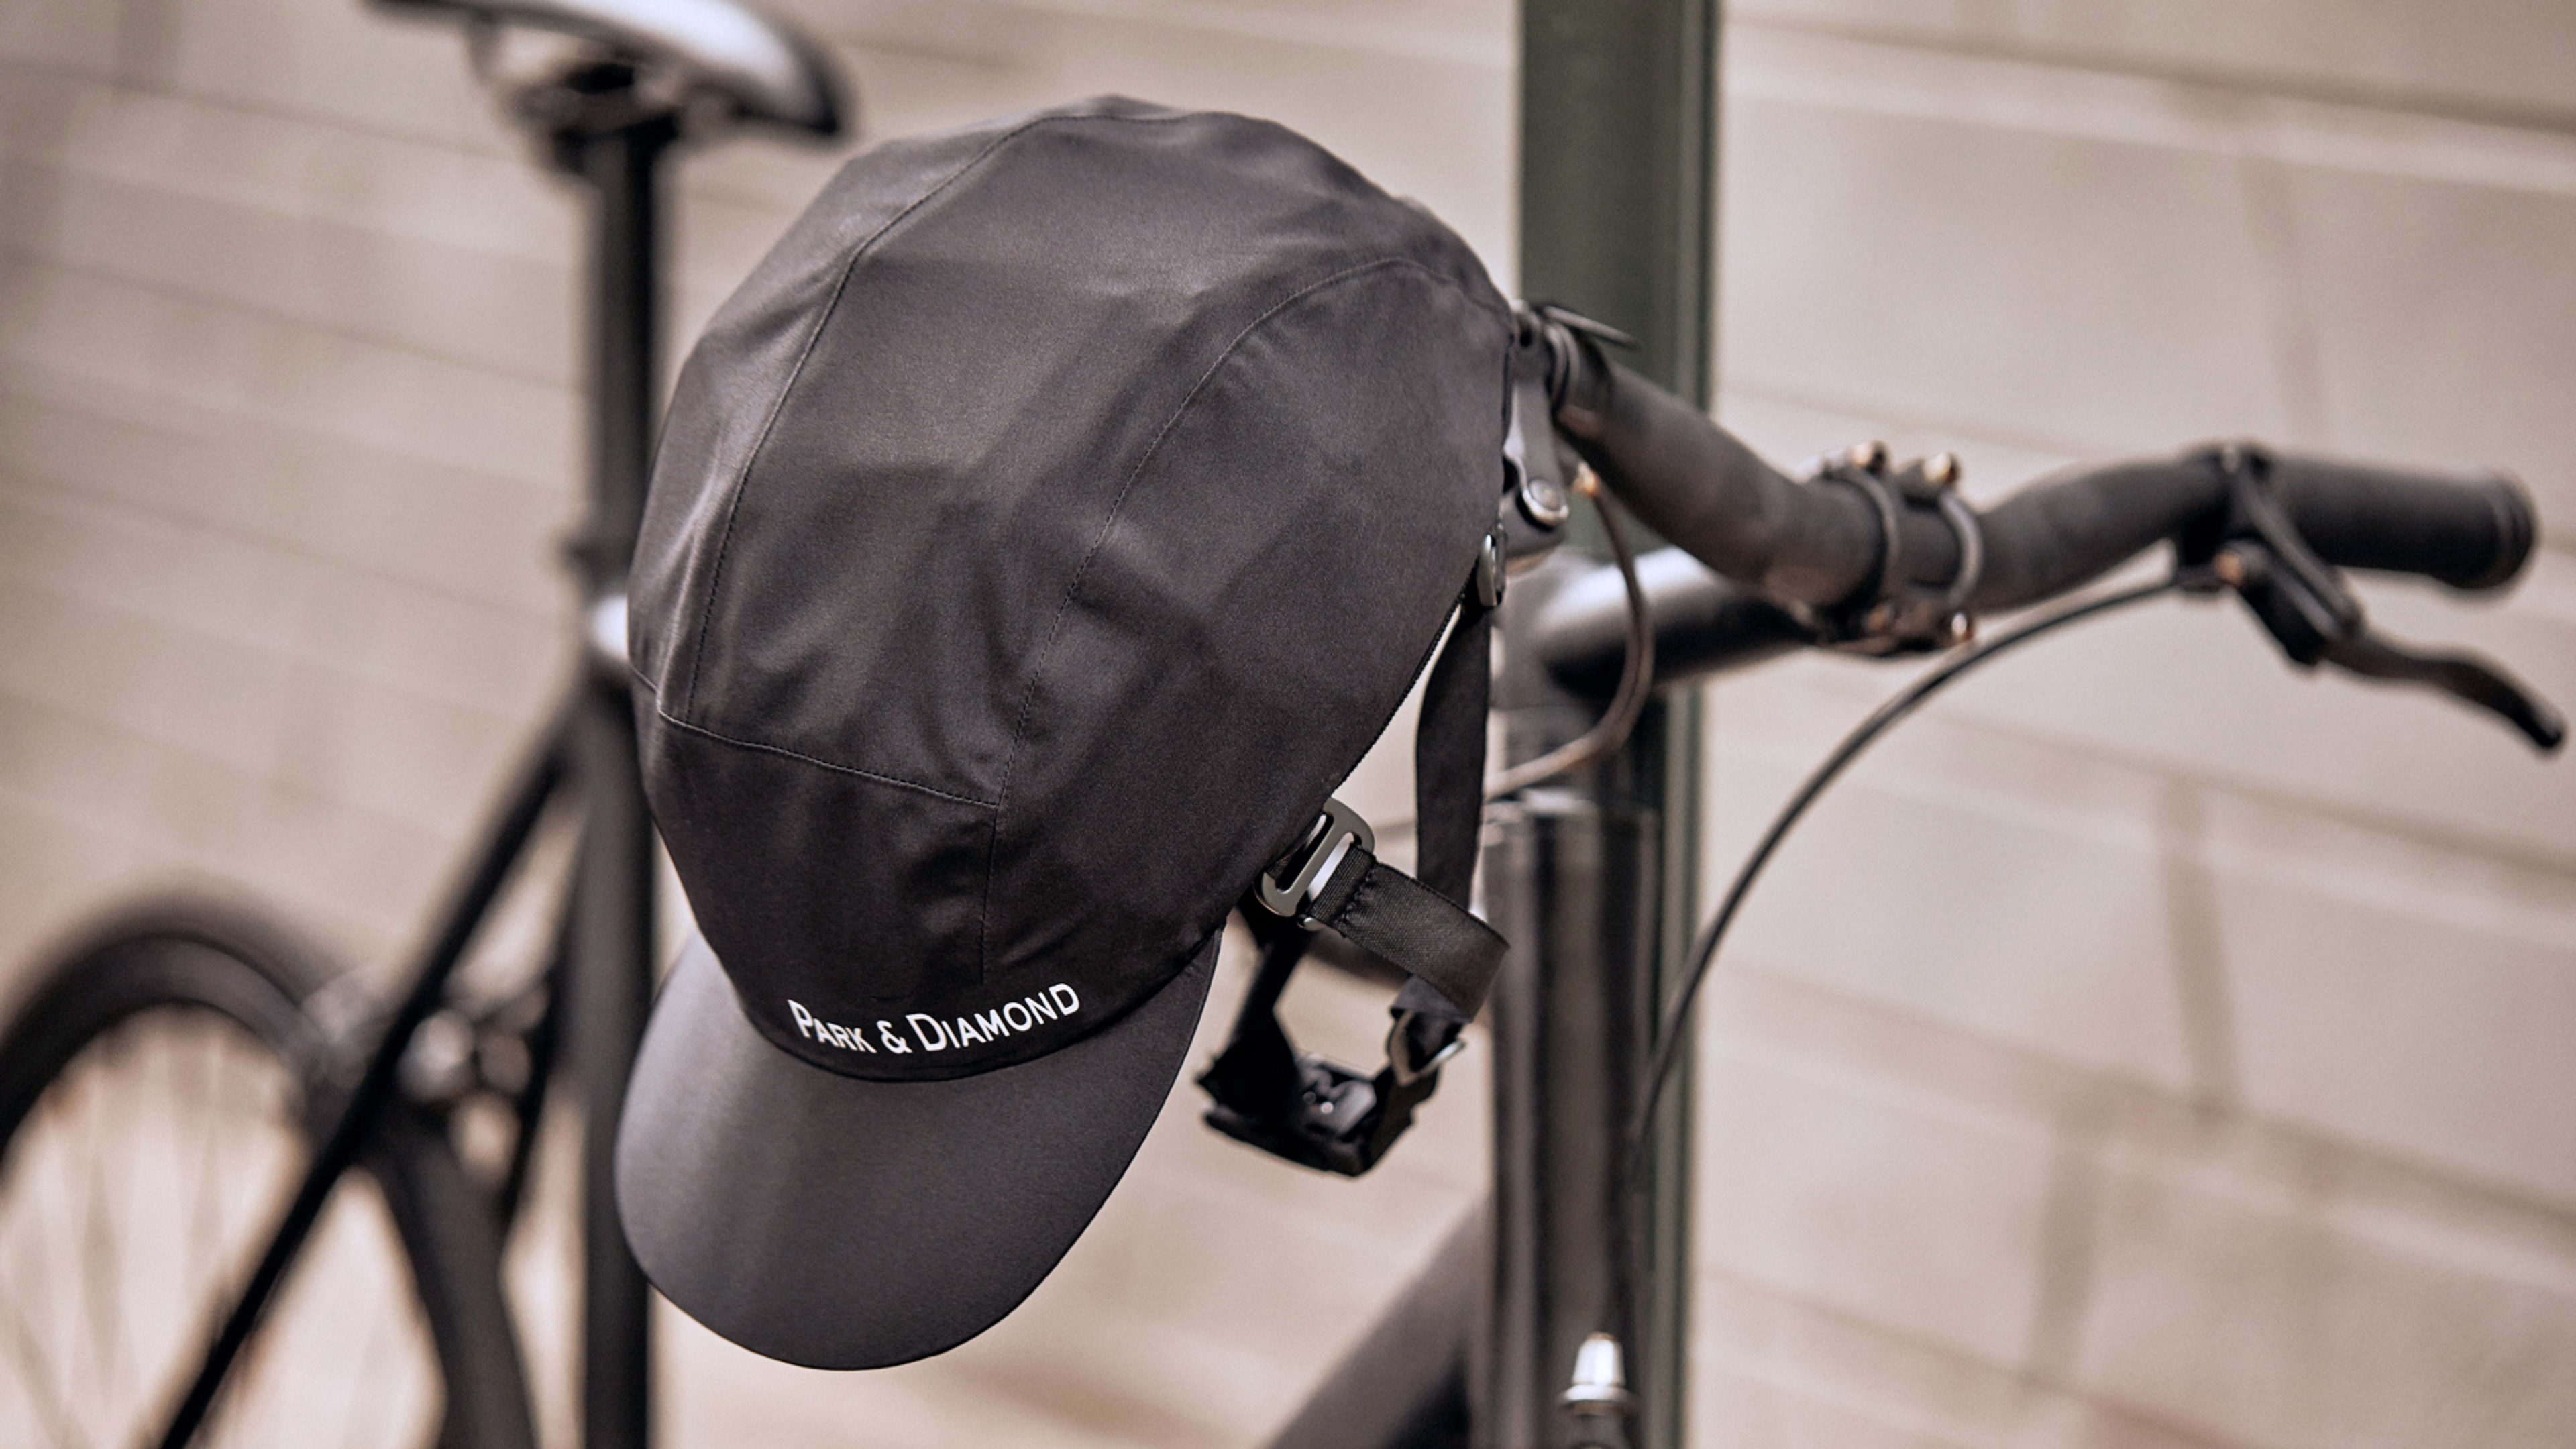 This bike helmet can fold down to the size of a water bottle